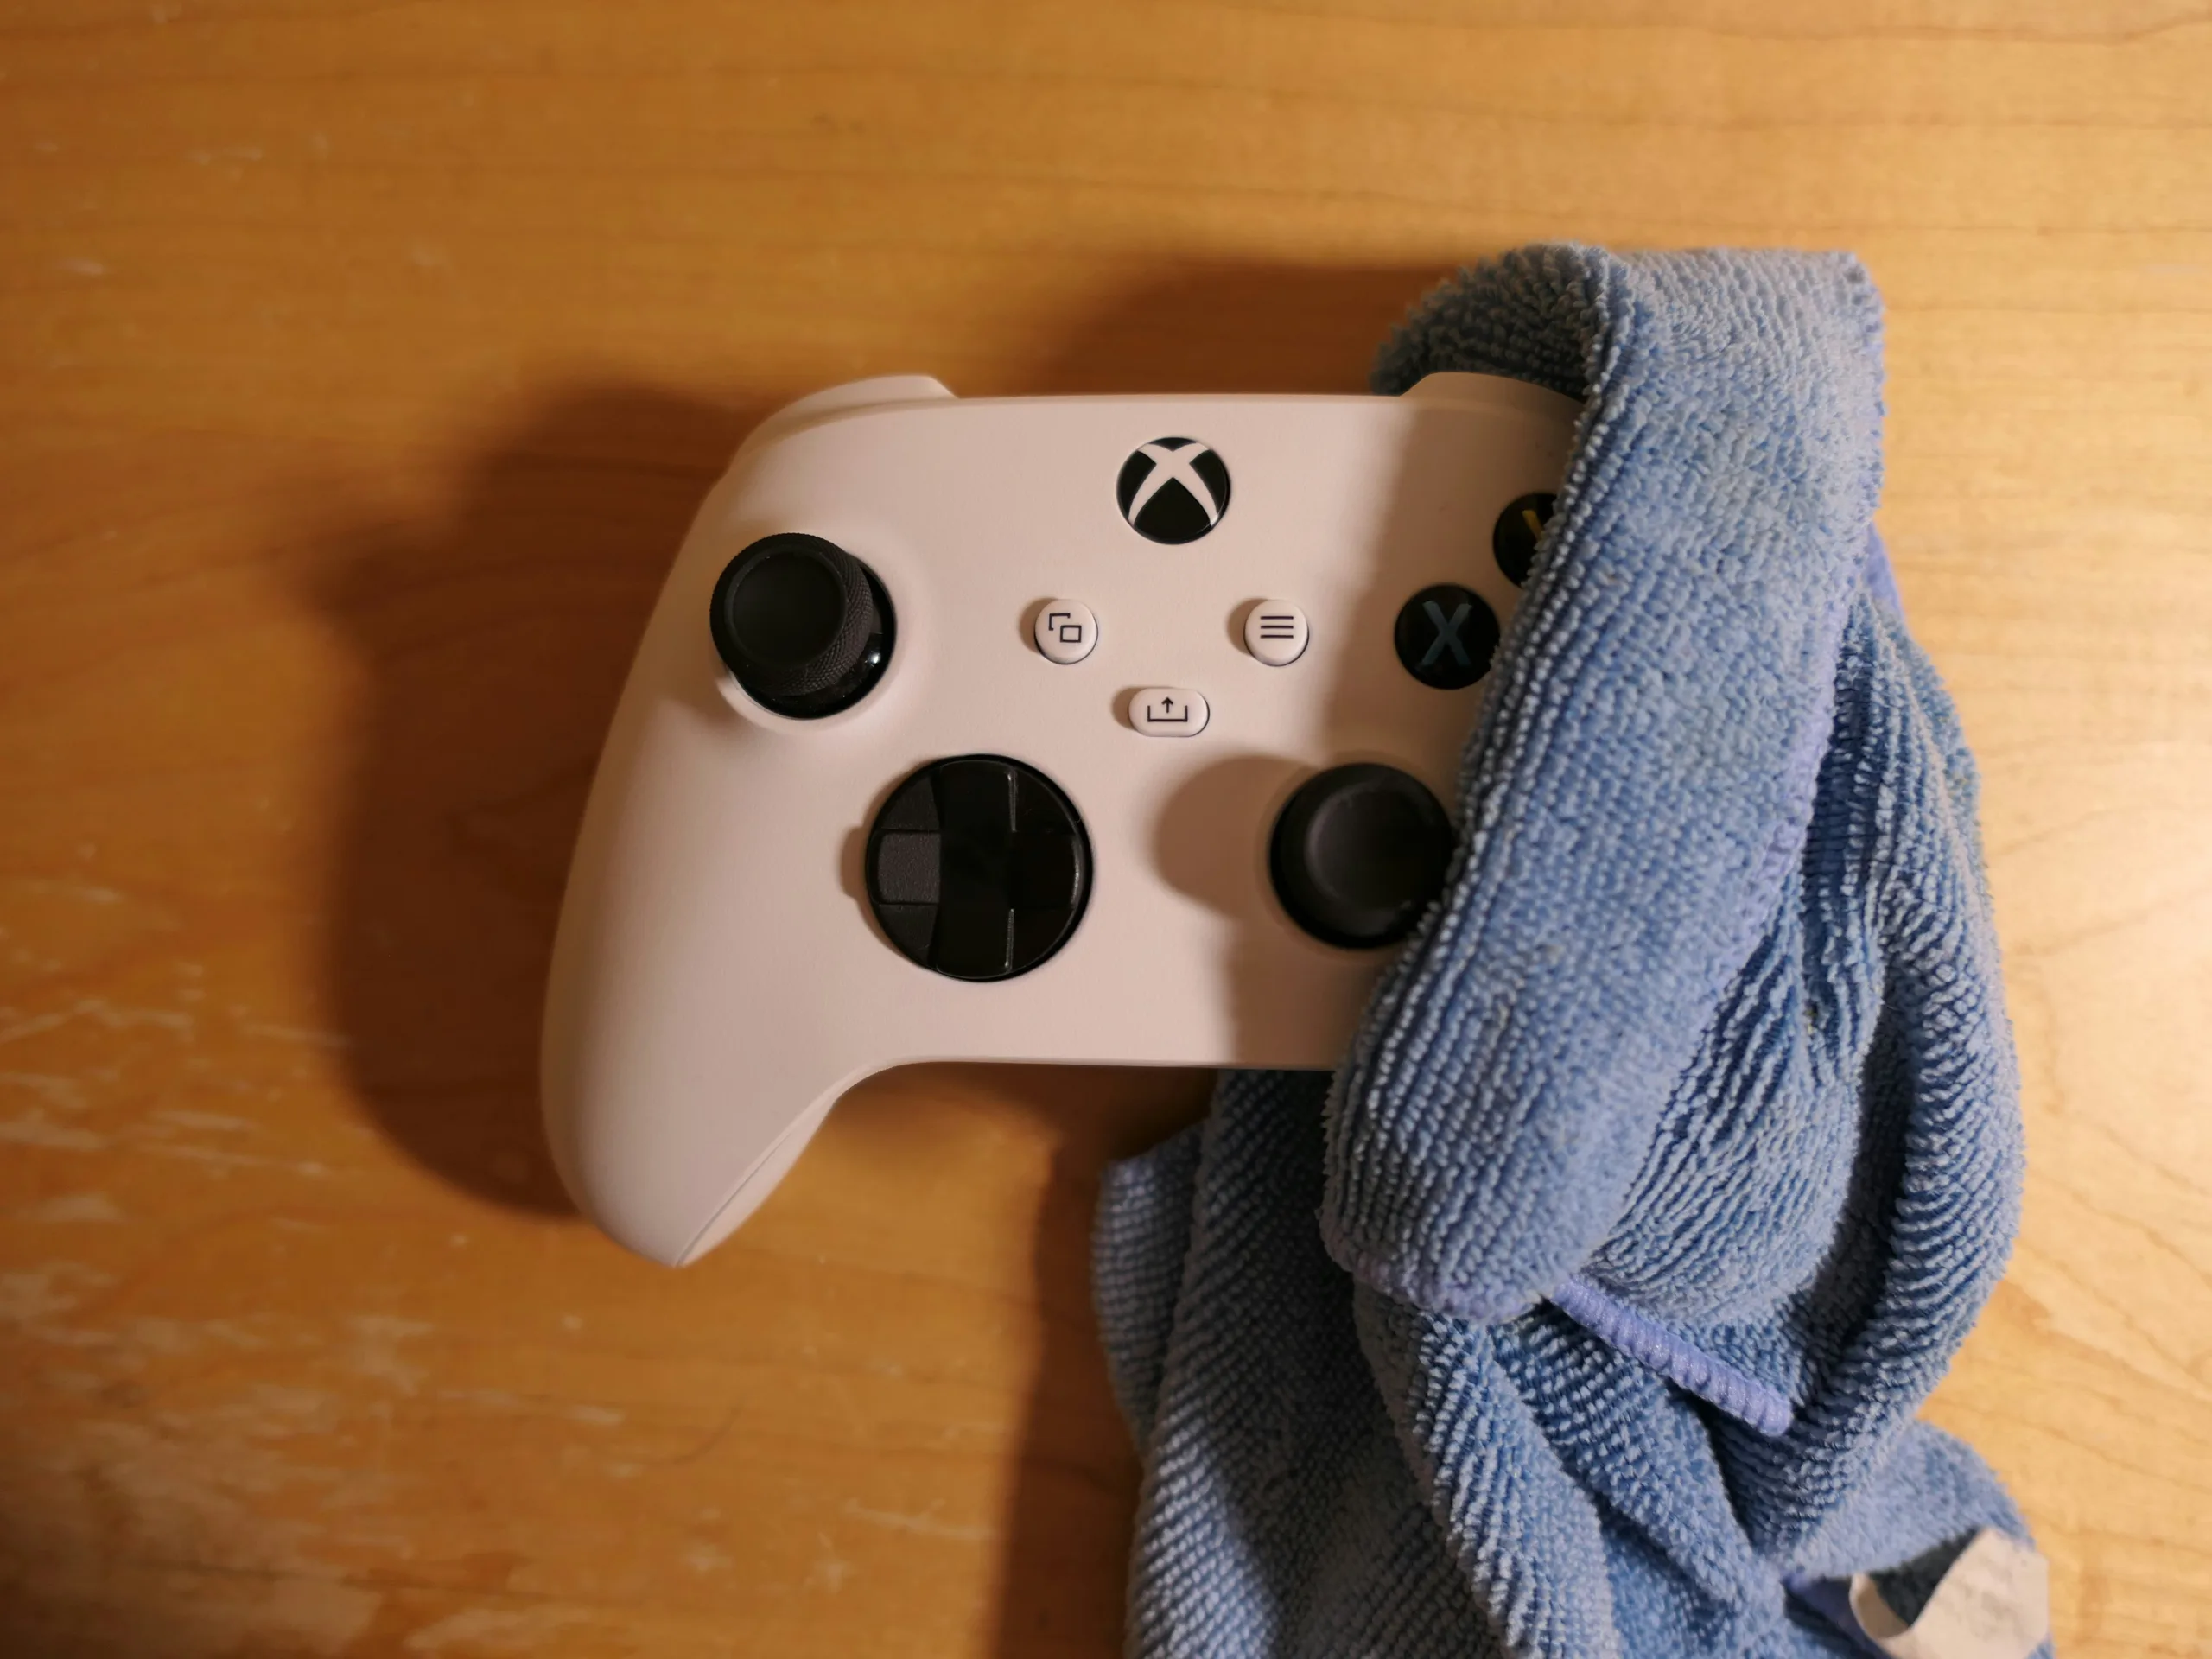 Cleaning and Maintaining the X box Controller